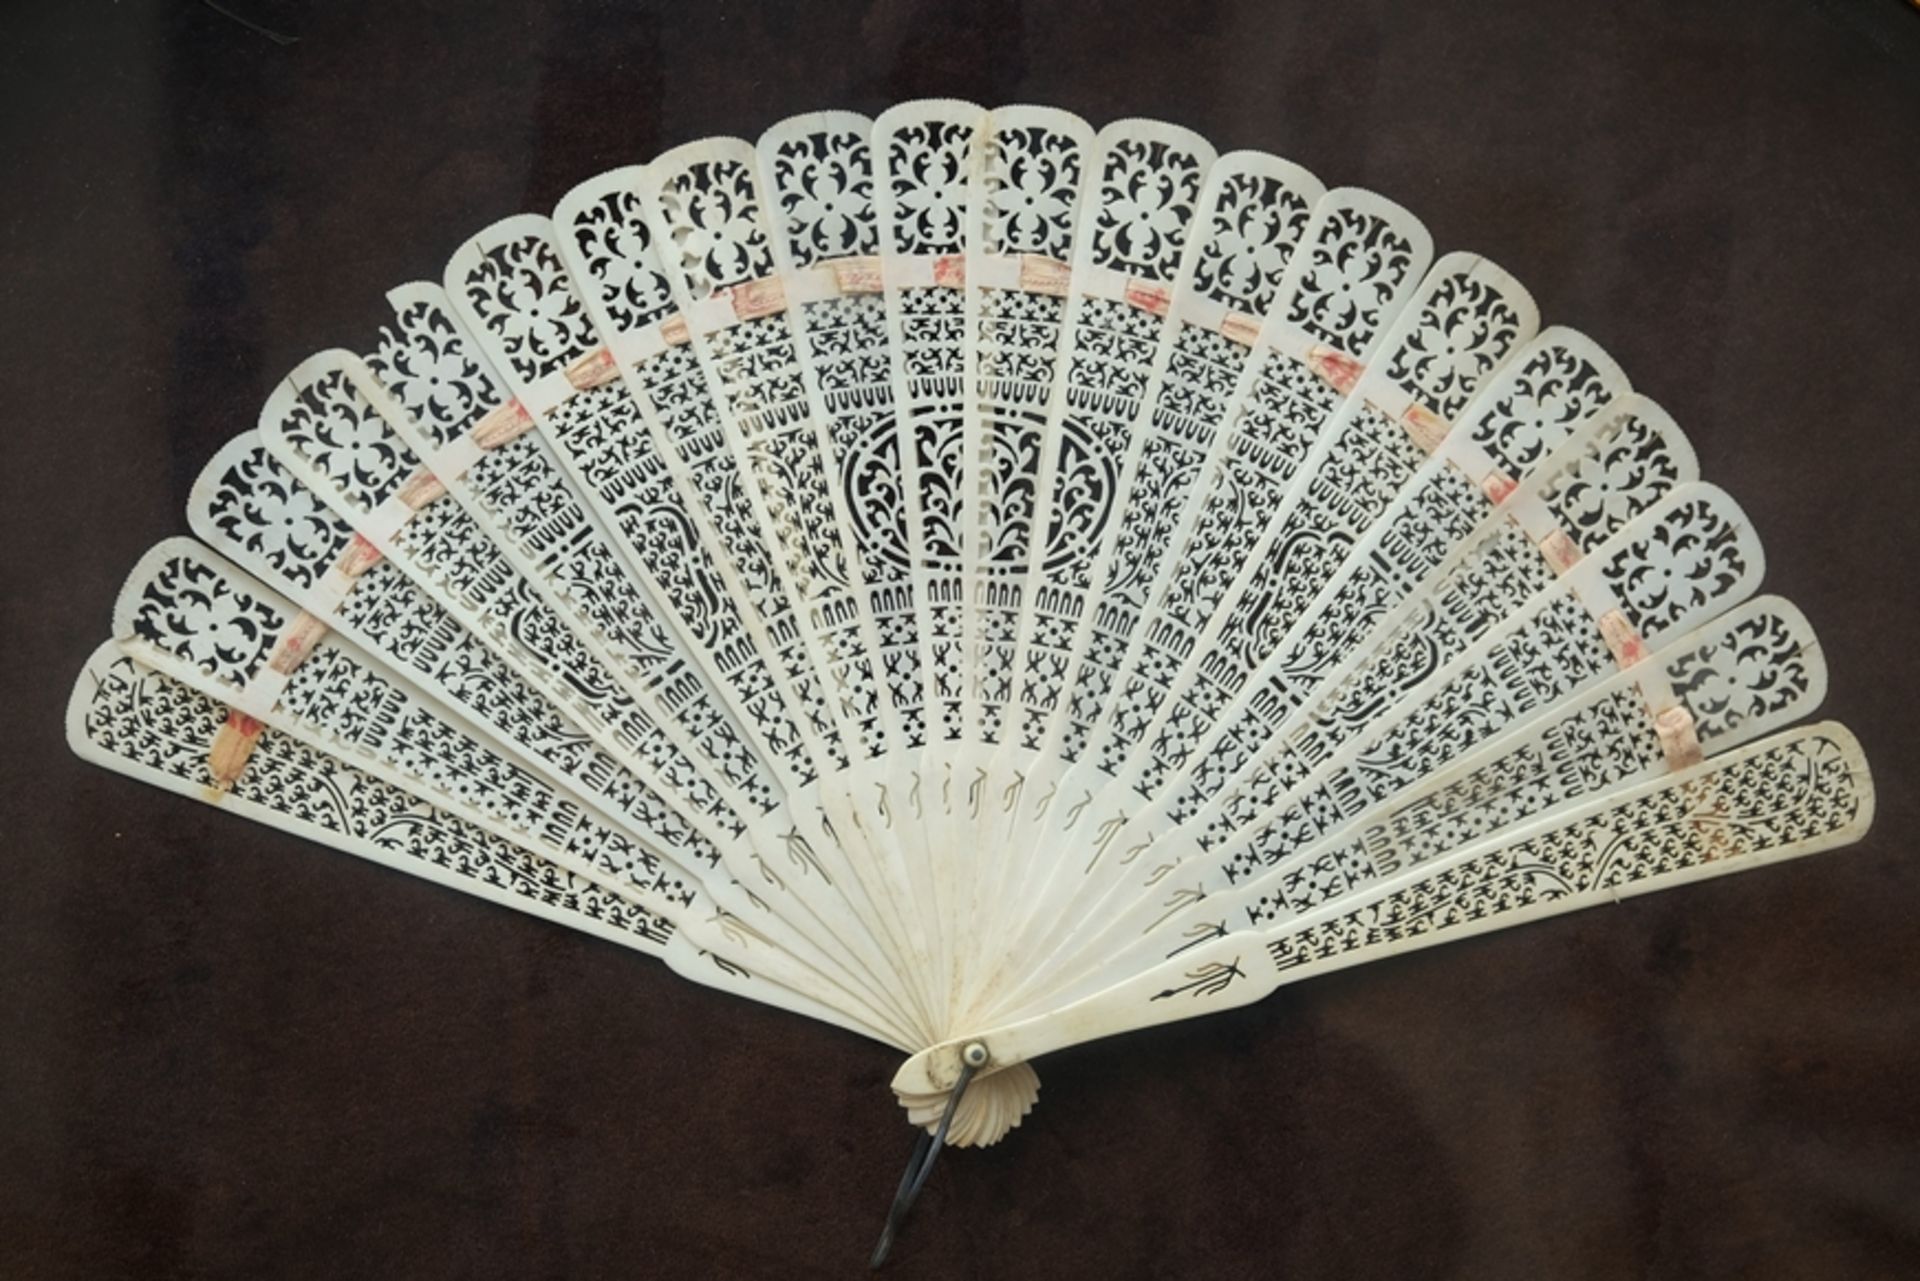 Fan made of bone, carved, early 20th century, Indonesia.